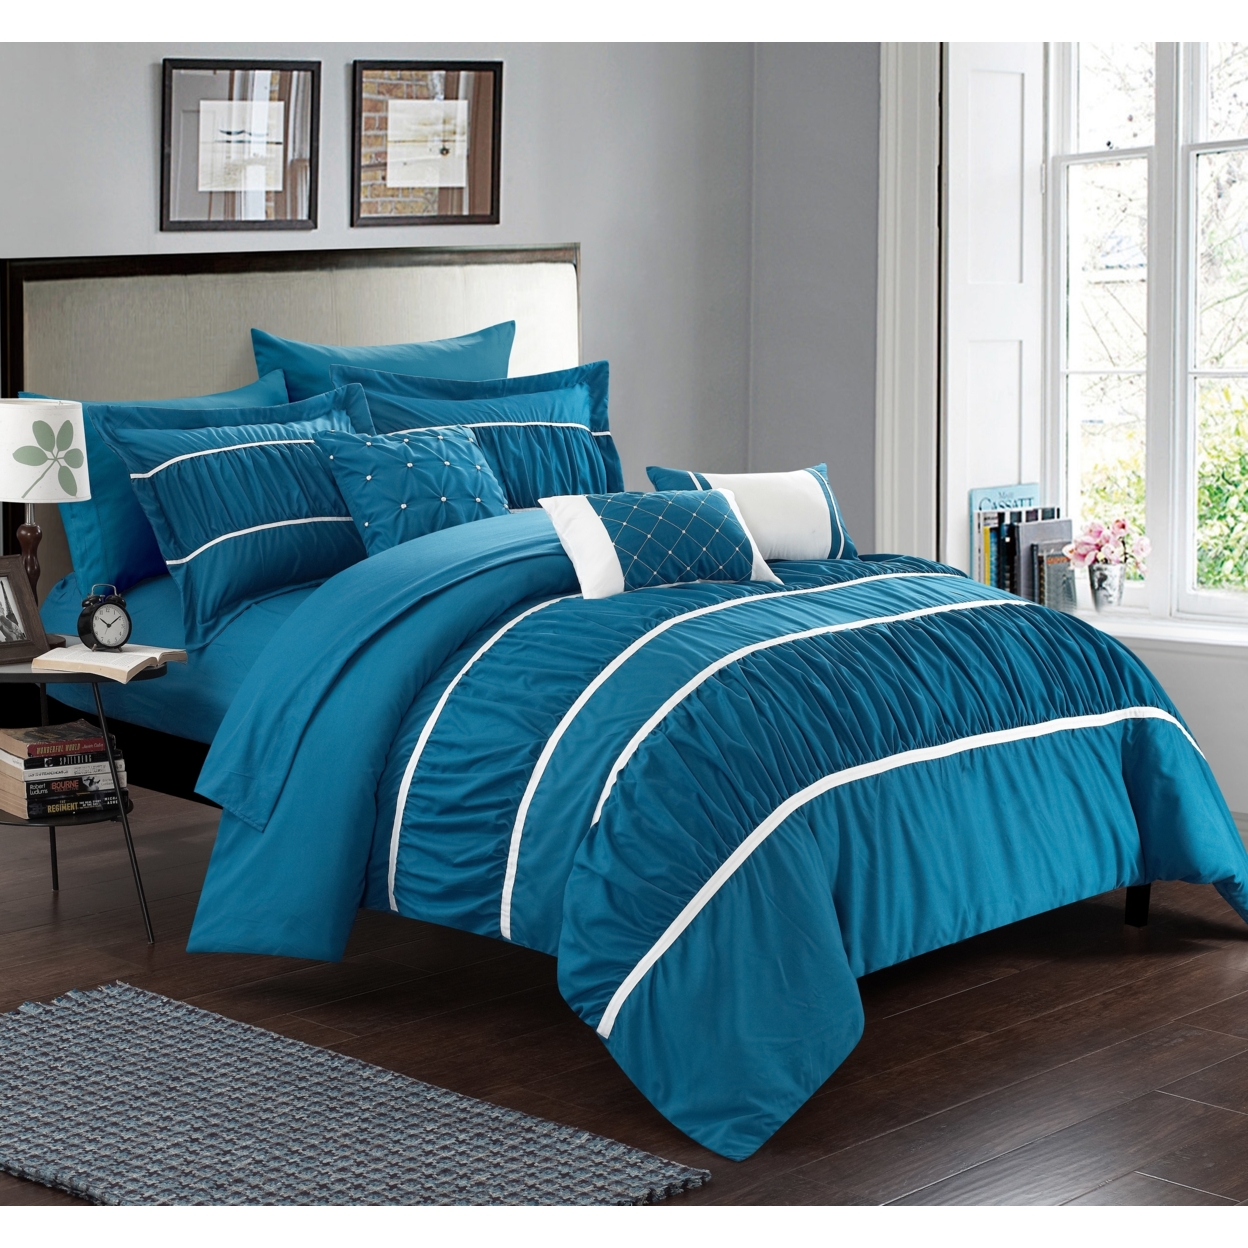 10-Piece Aero Pleated & Ruffled Bed In A Bag Comforter And Sheet Set - Teal, King